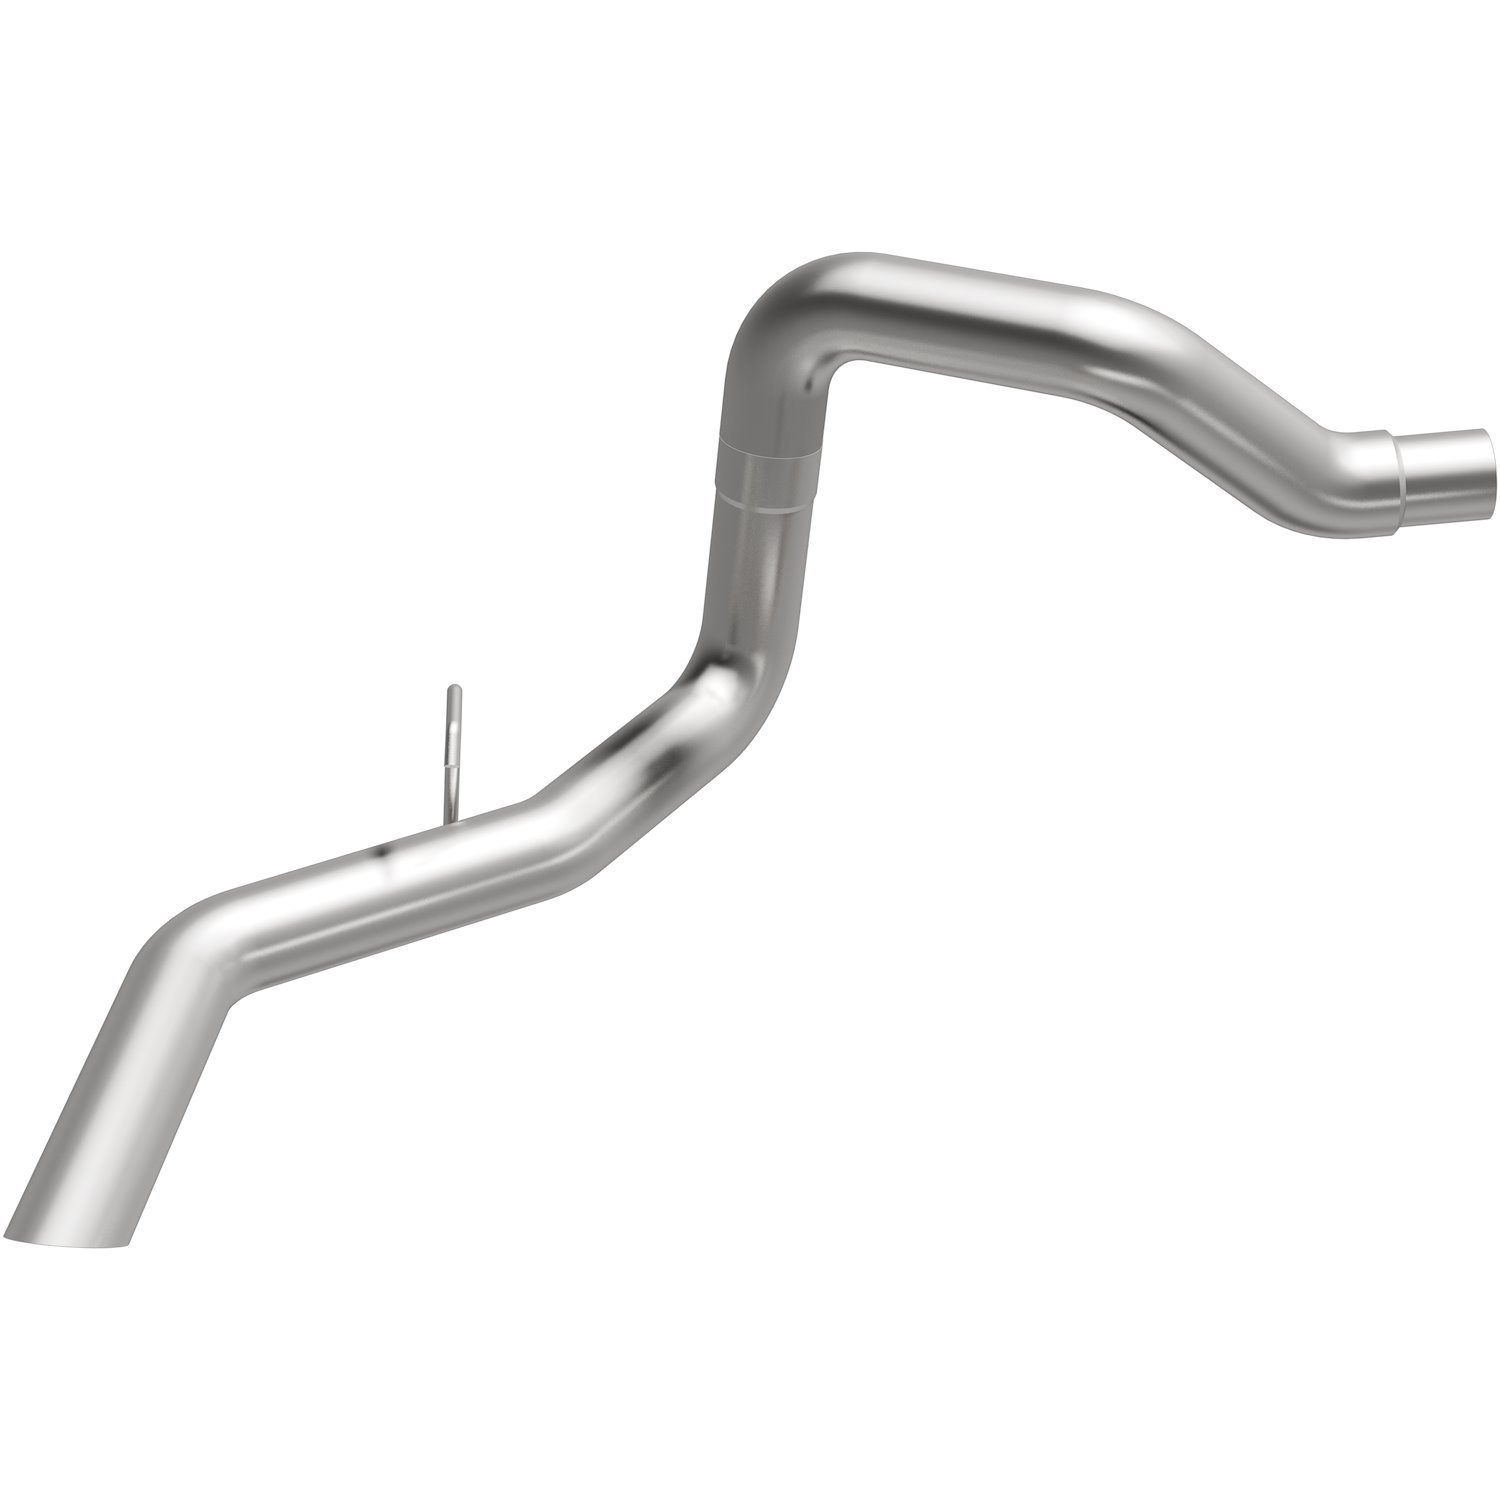 Direct-Fit Exhaust Tail Pipe, 1999-2003 Ford F-250/350 Super-Duty